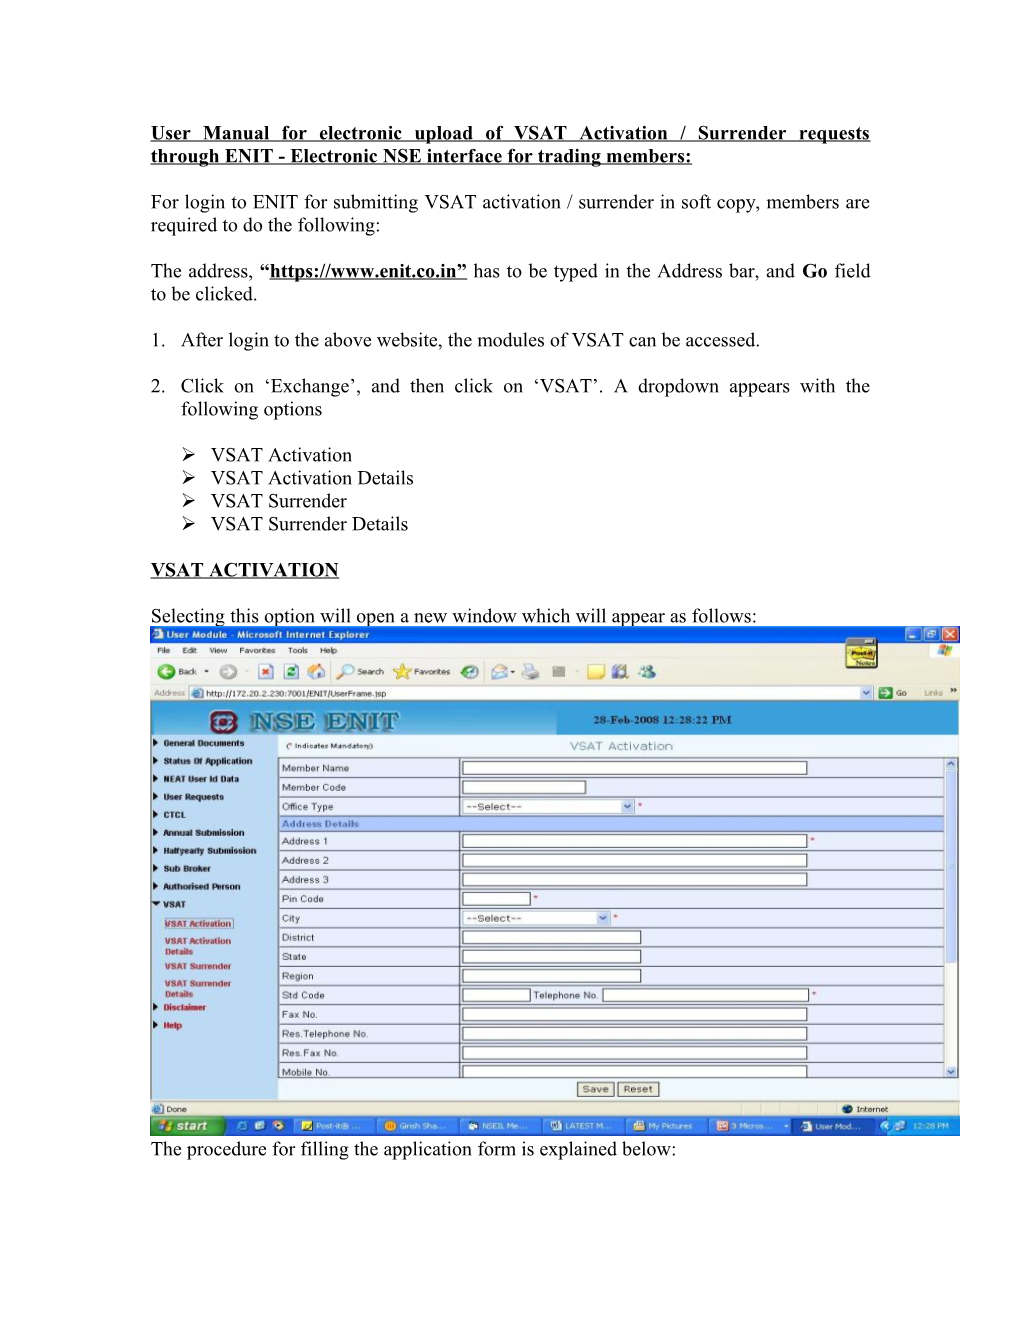 User Manual for Electronic Upload of VSAT Activation / Surrender Requests Through ENIT